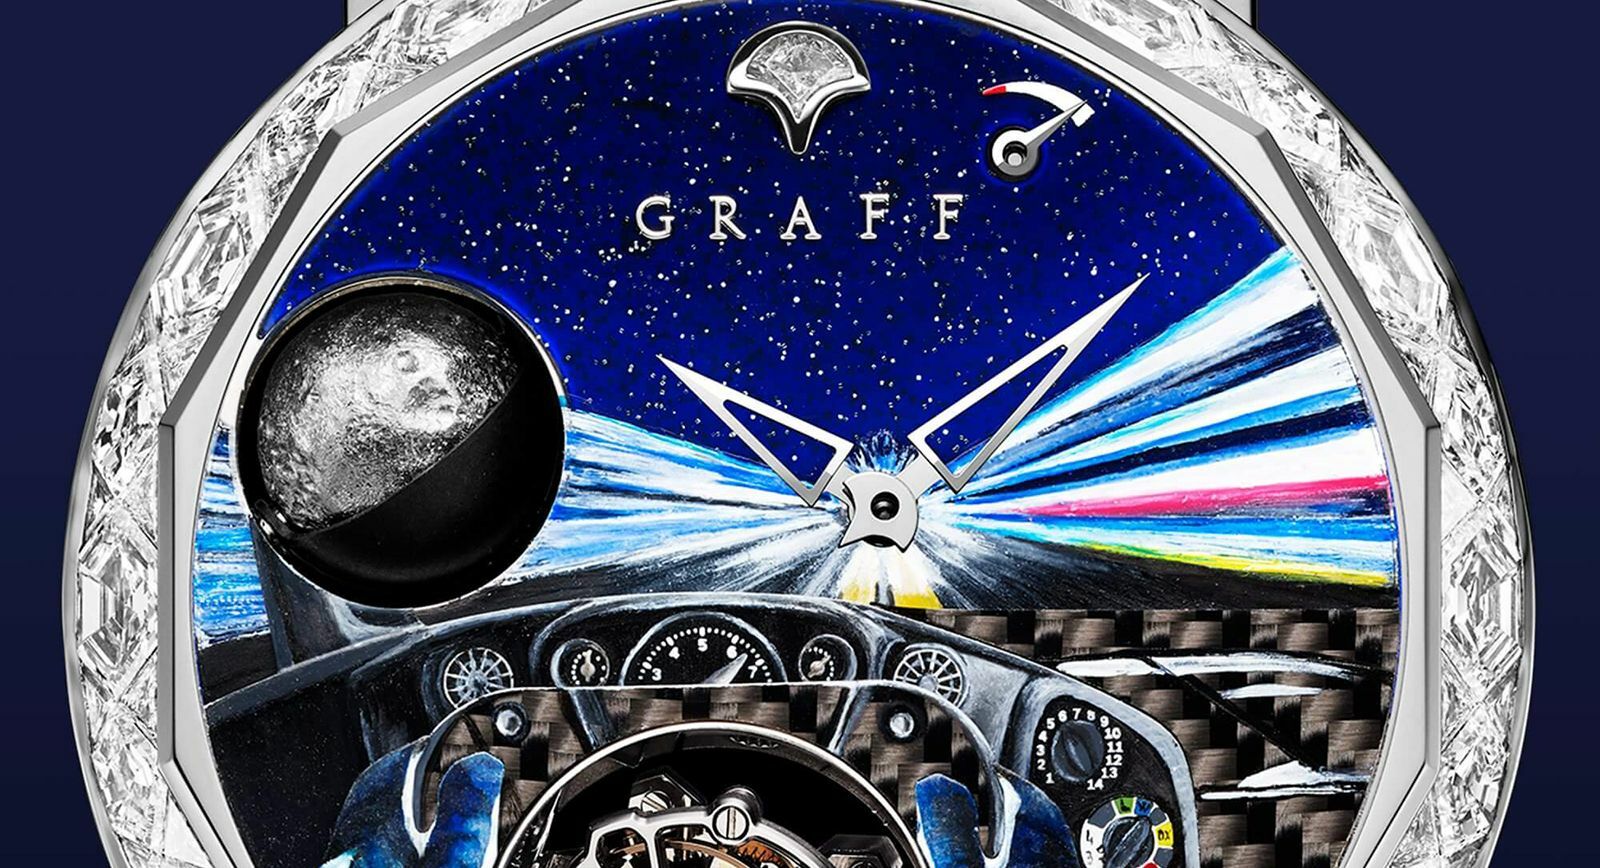 Graff: High art jewellery watches from Baselworld 2018